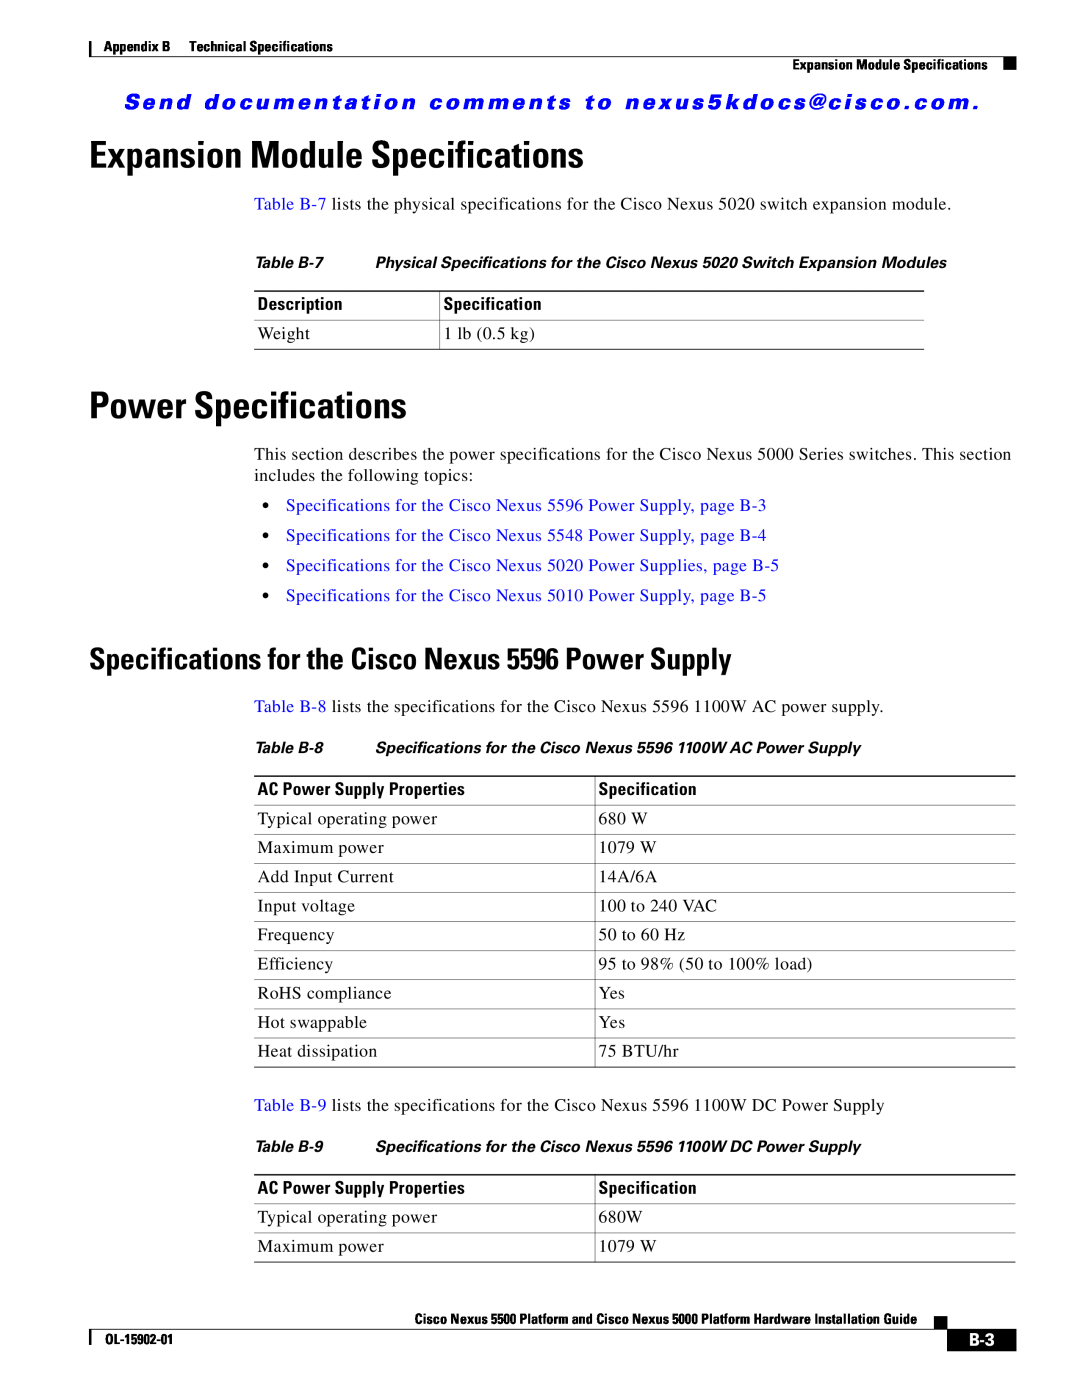 Cisco Systems 5000 manual Specifications for the Cisco Nexus 5596 Power Supply, Description, Weight, 1 lb 0.5 kg 